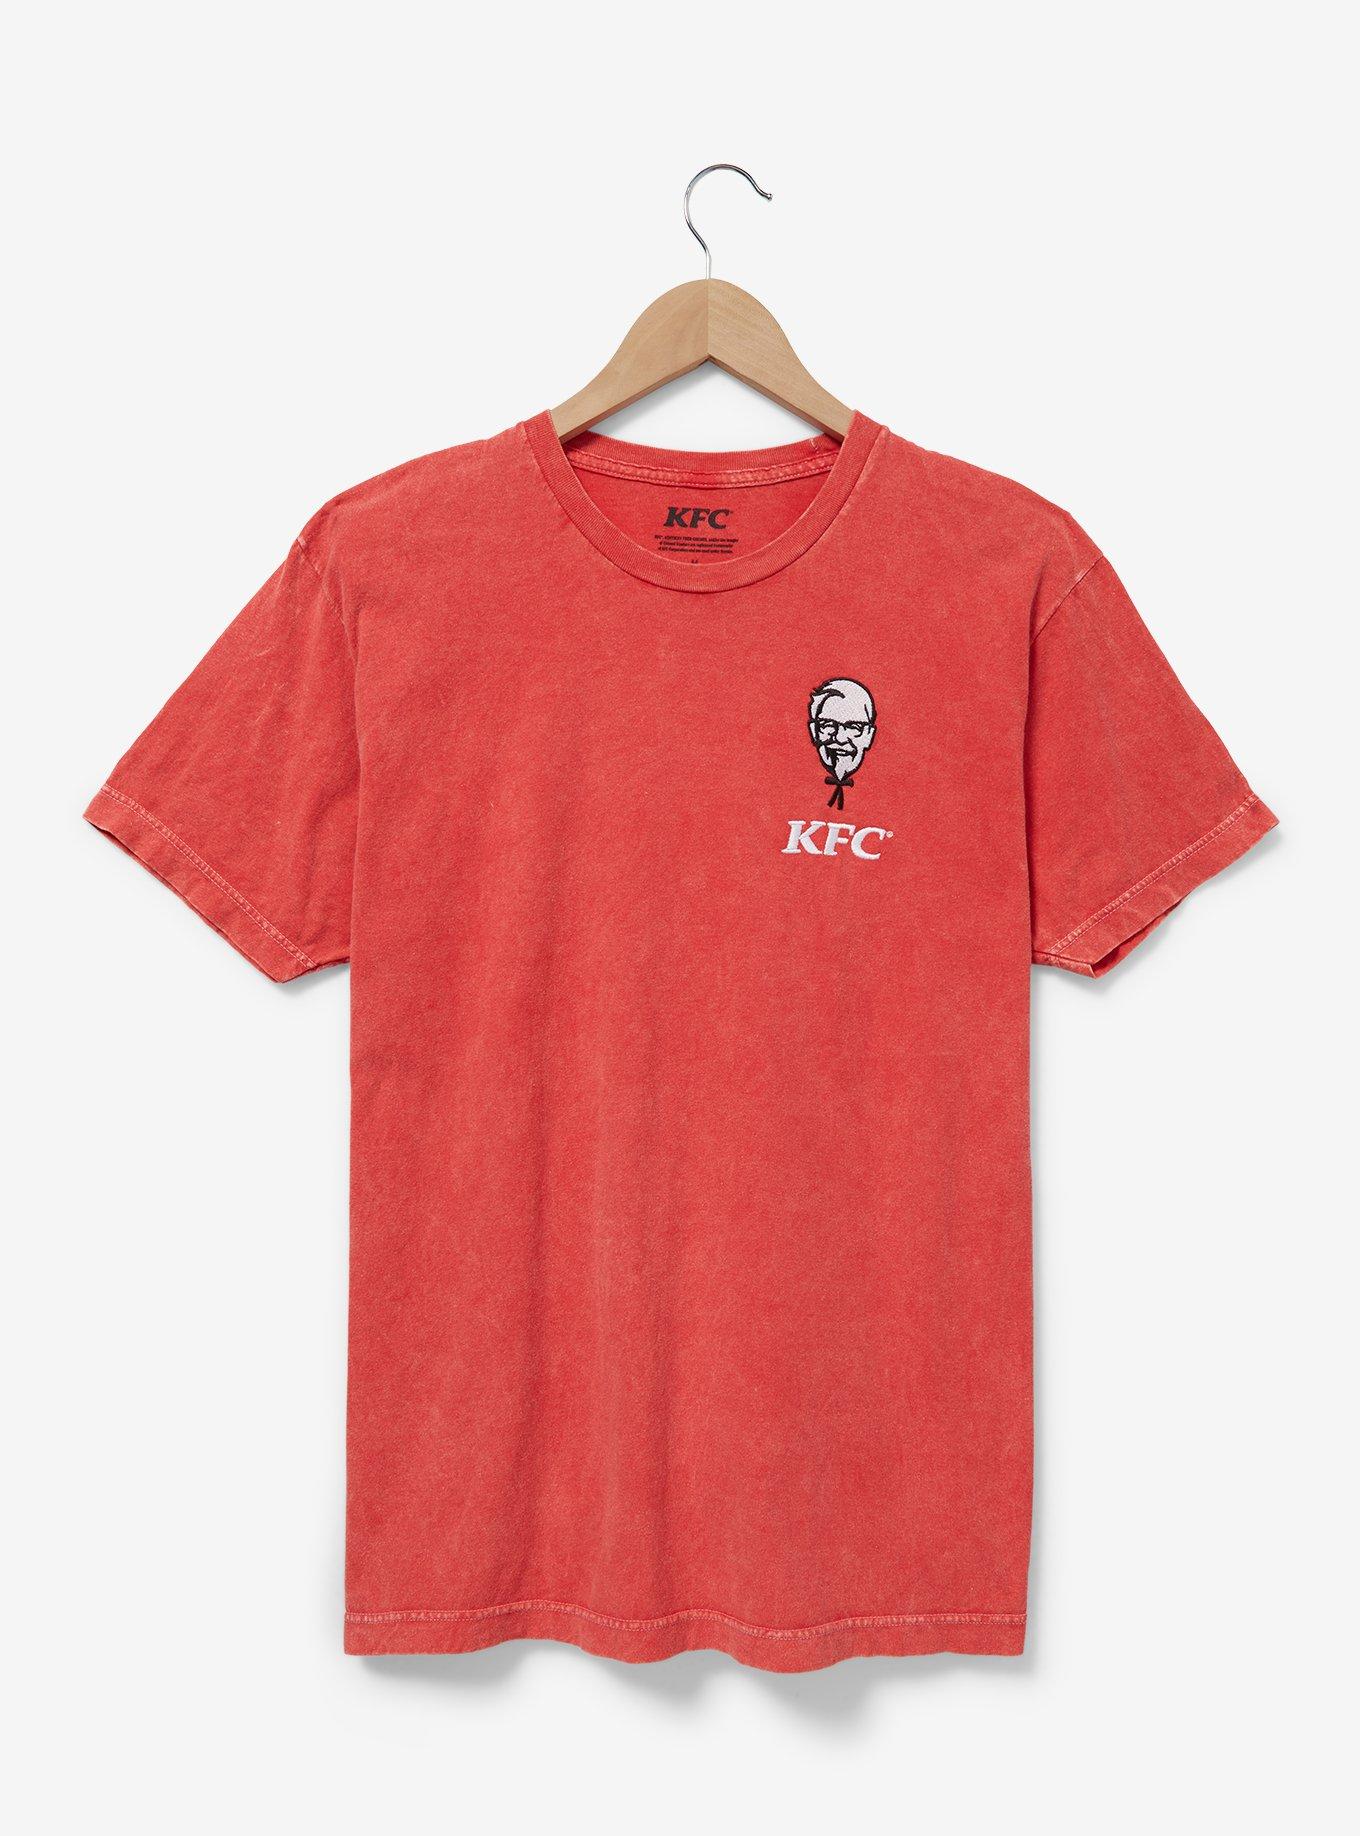 KFC Colonel Sanders Embroidered Portrait T-Shirt - BoxLunch Exclusive